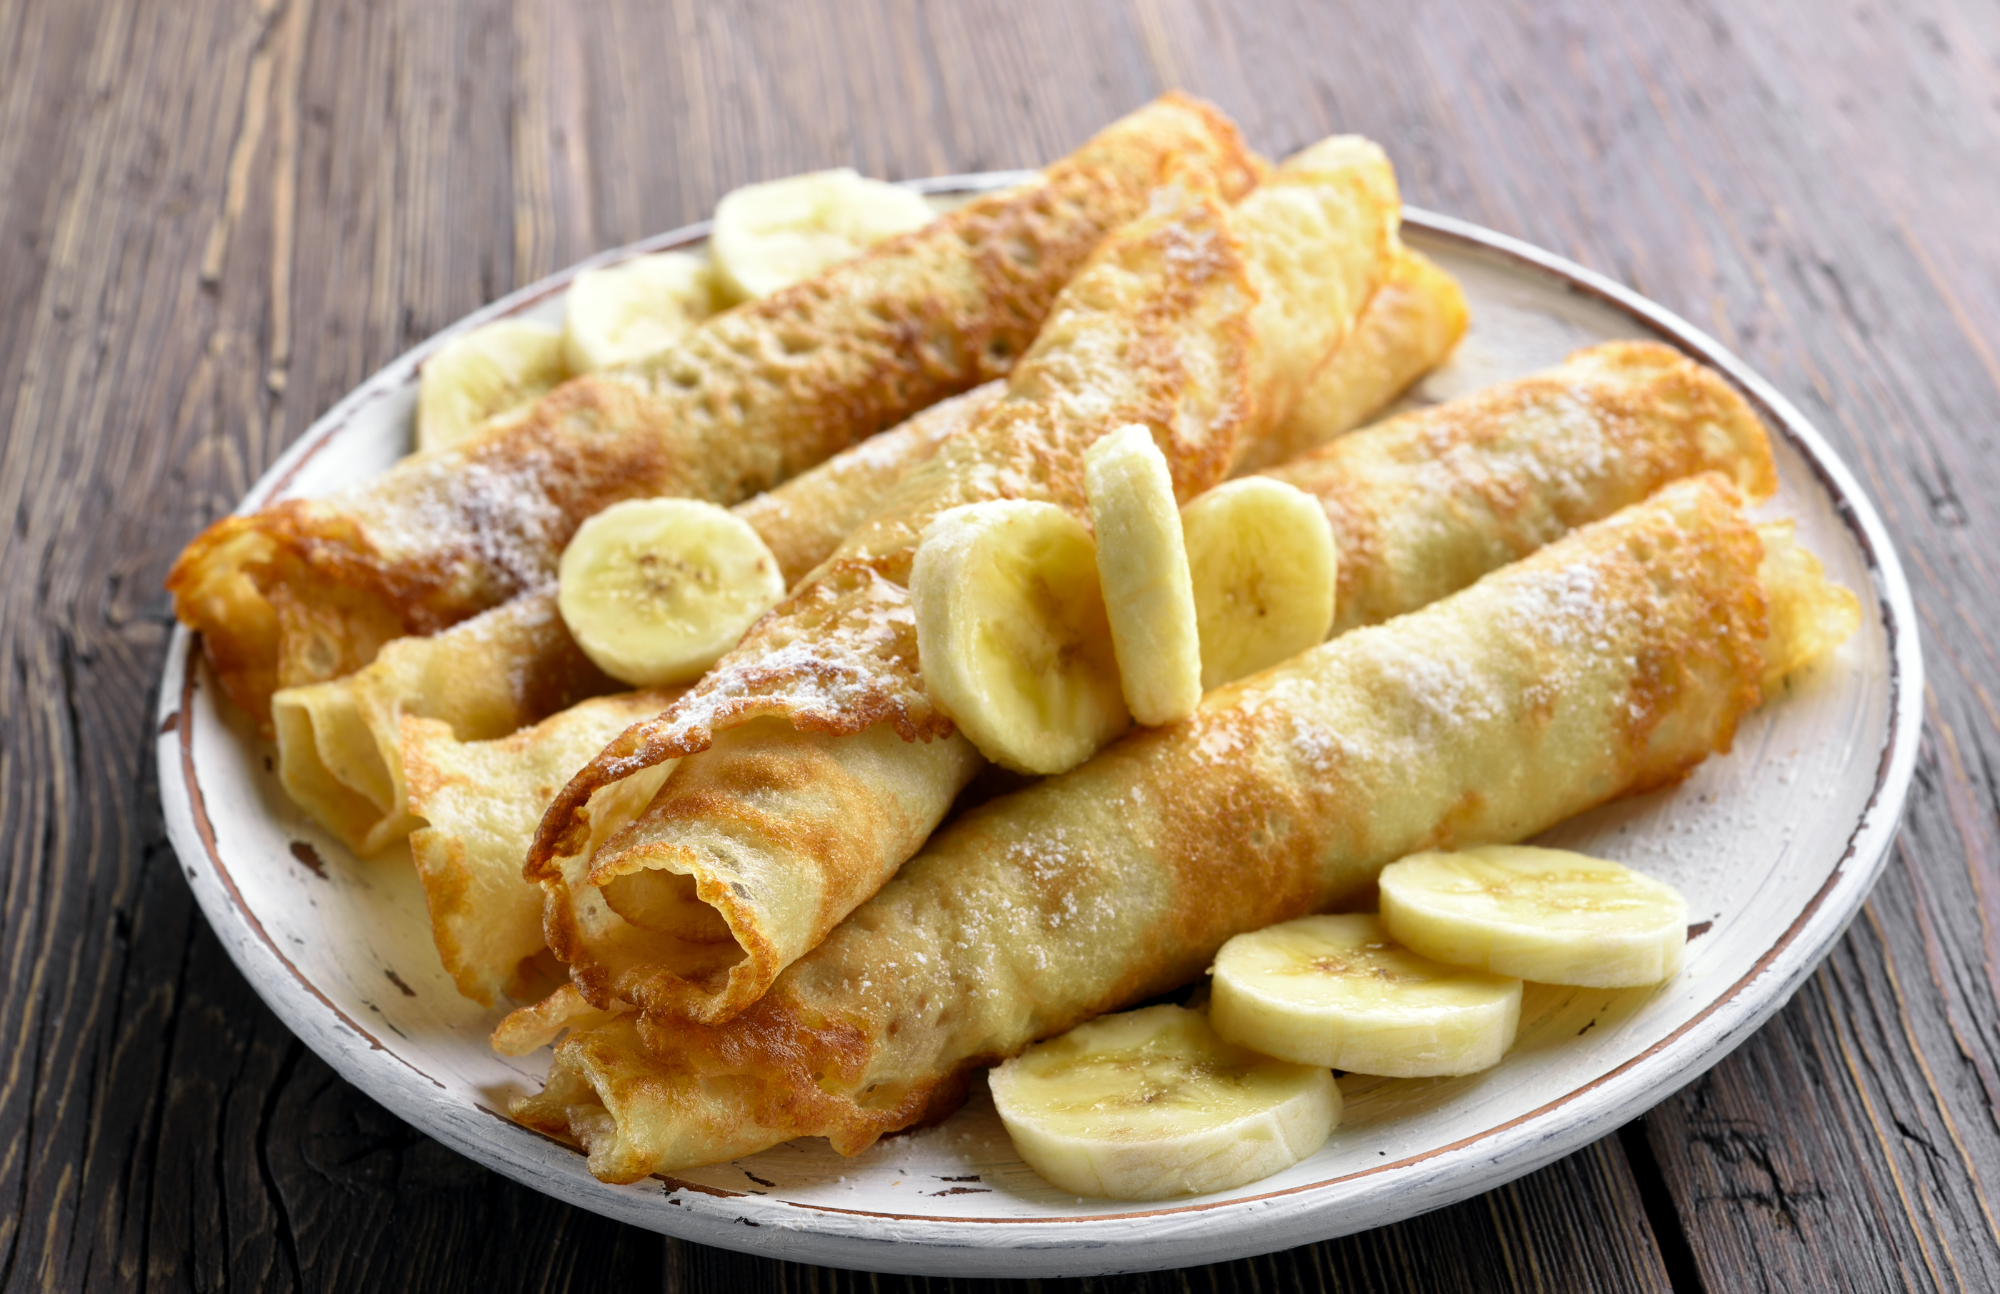 Whole wheat crepes with syrup and bananas pictured on a white plate on a wooden table